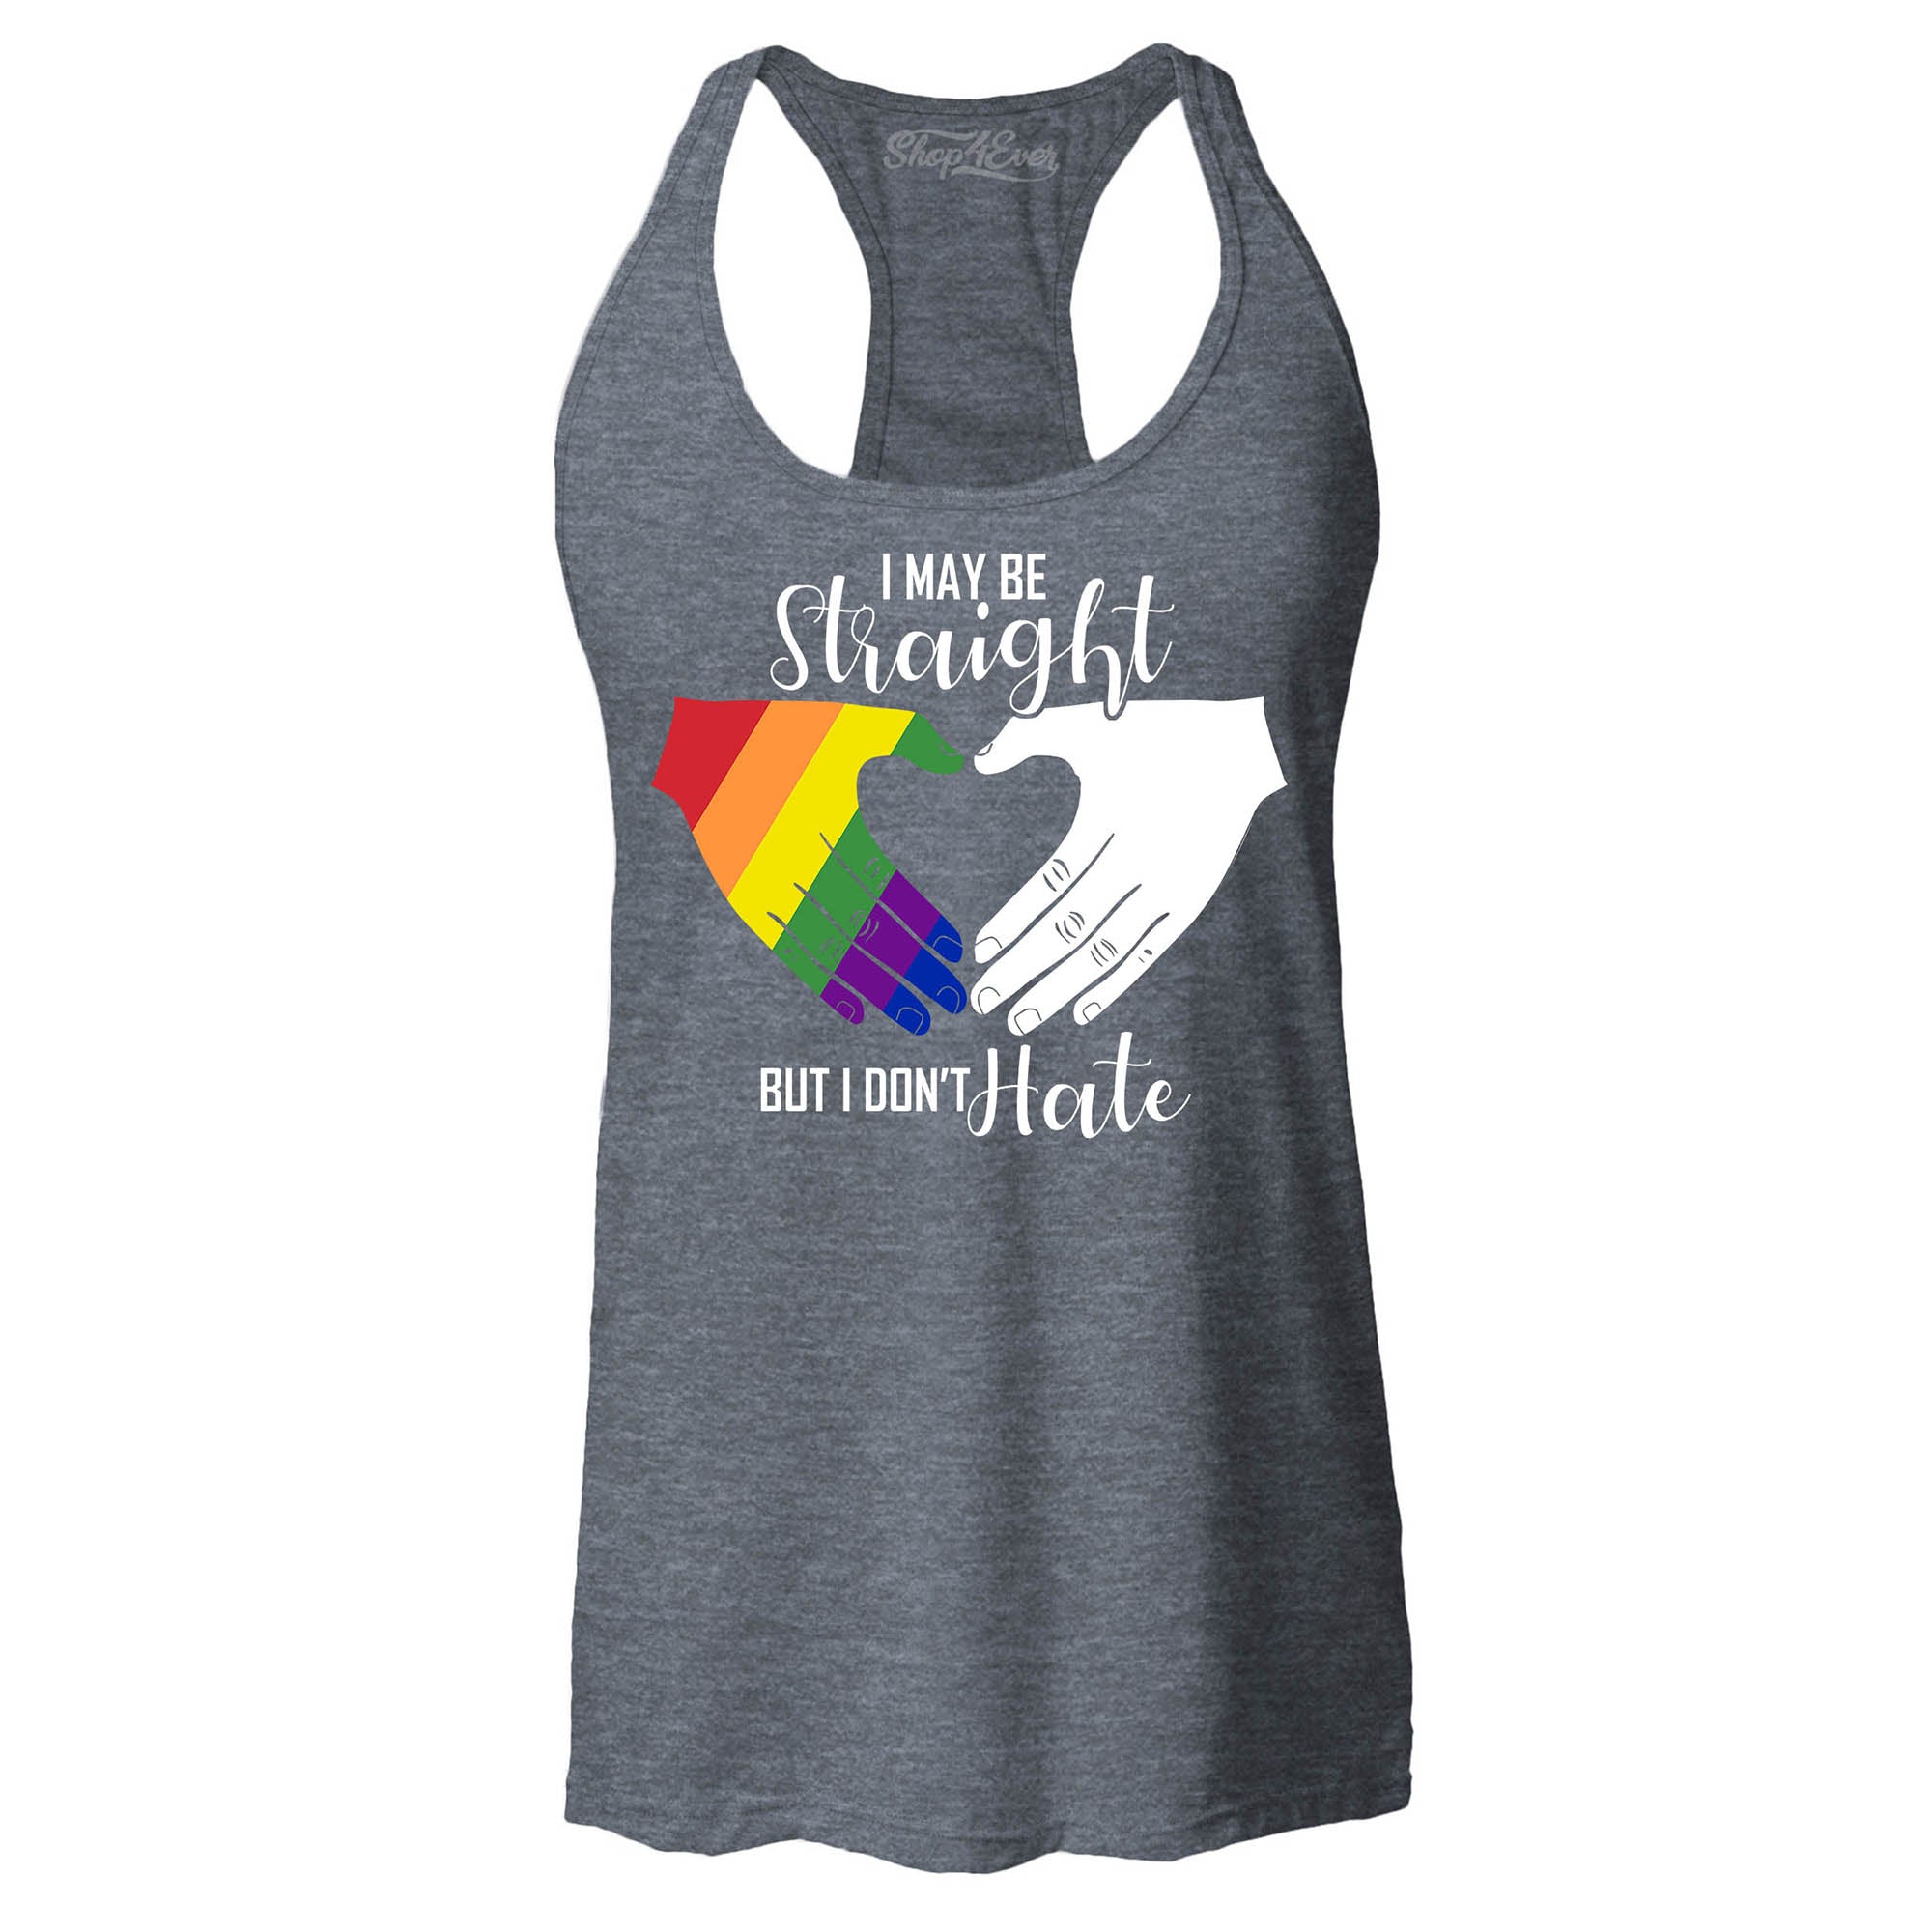 I May Be Straight but I Don't Hate ~ Gay Pride Women's Racerback Tank Top Slim Fit